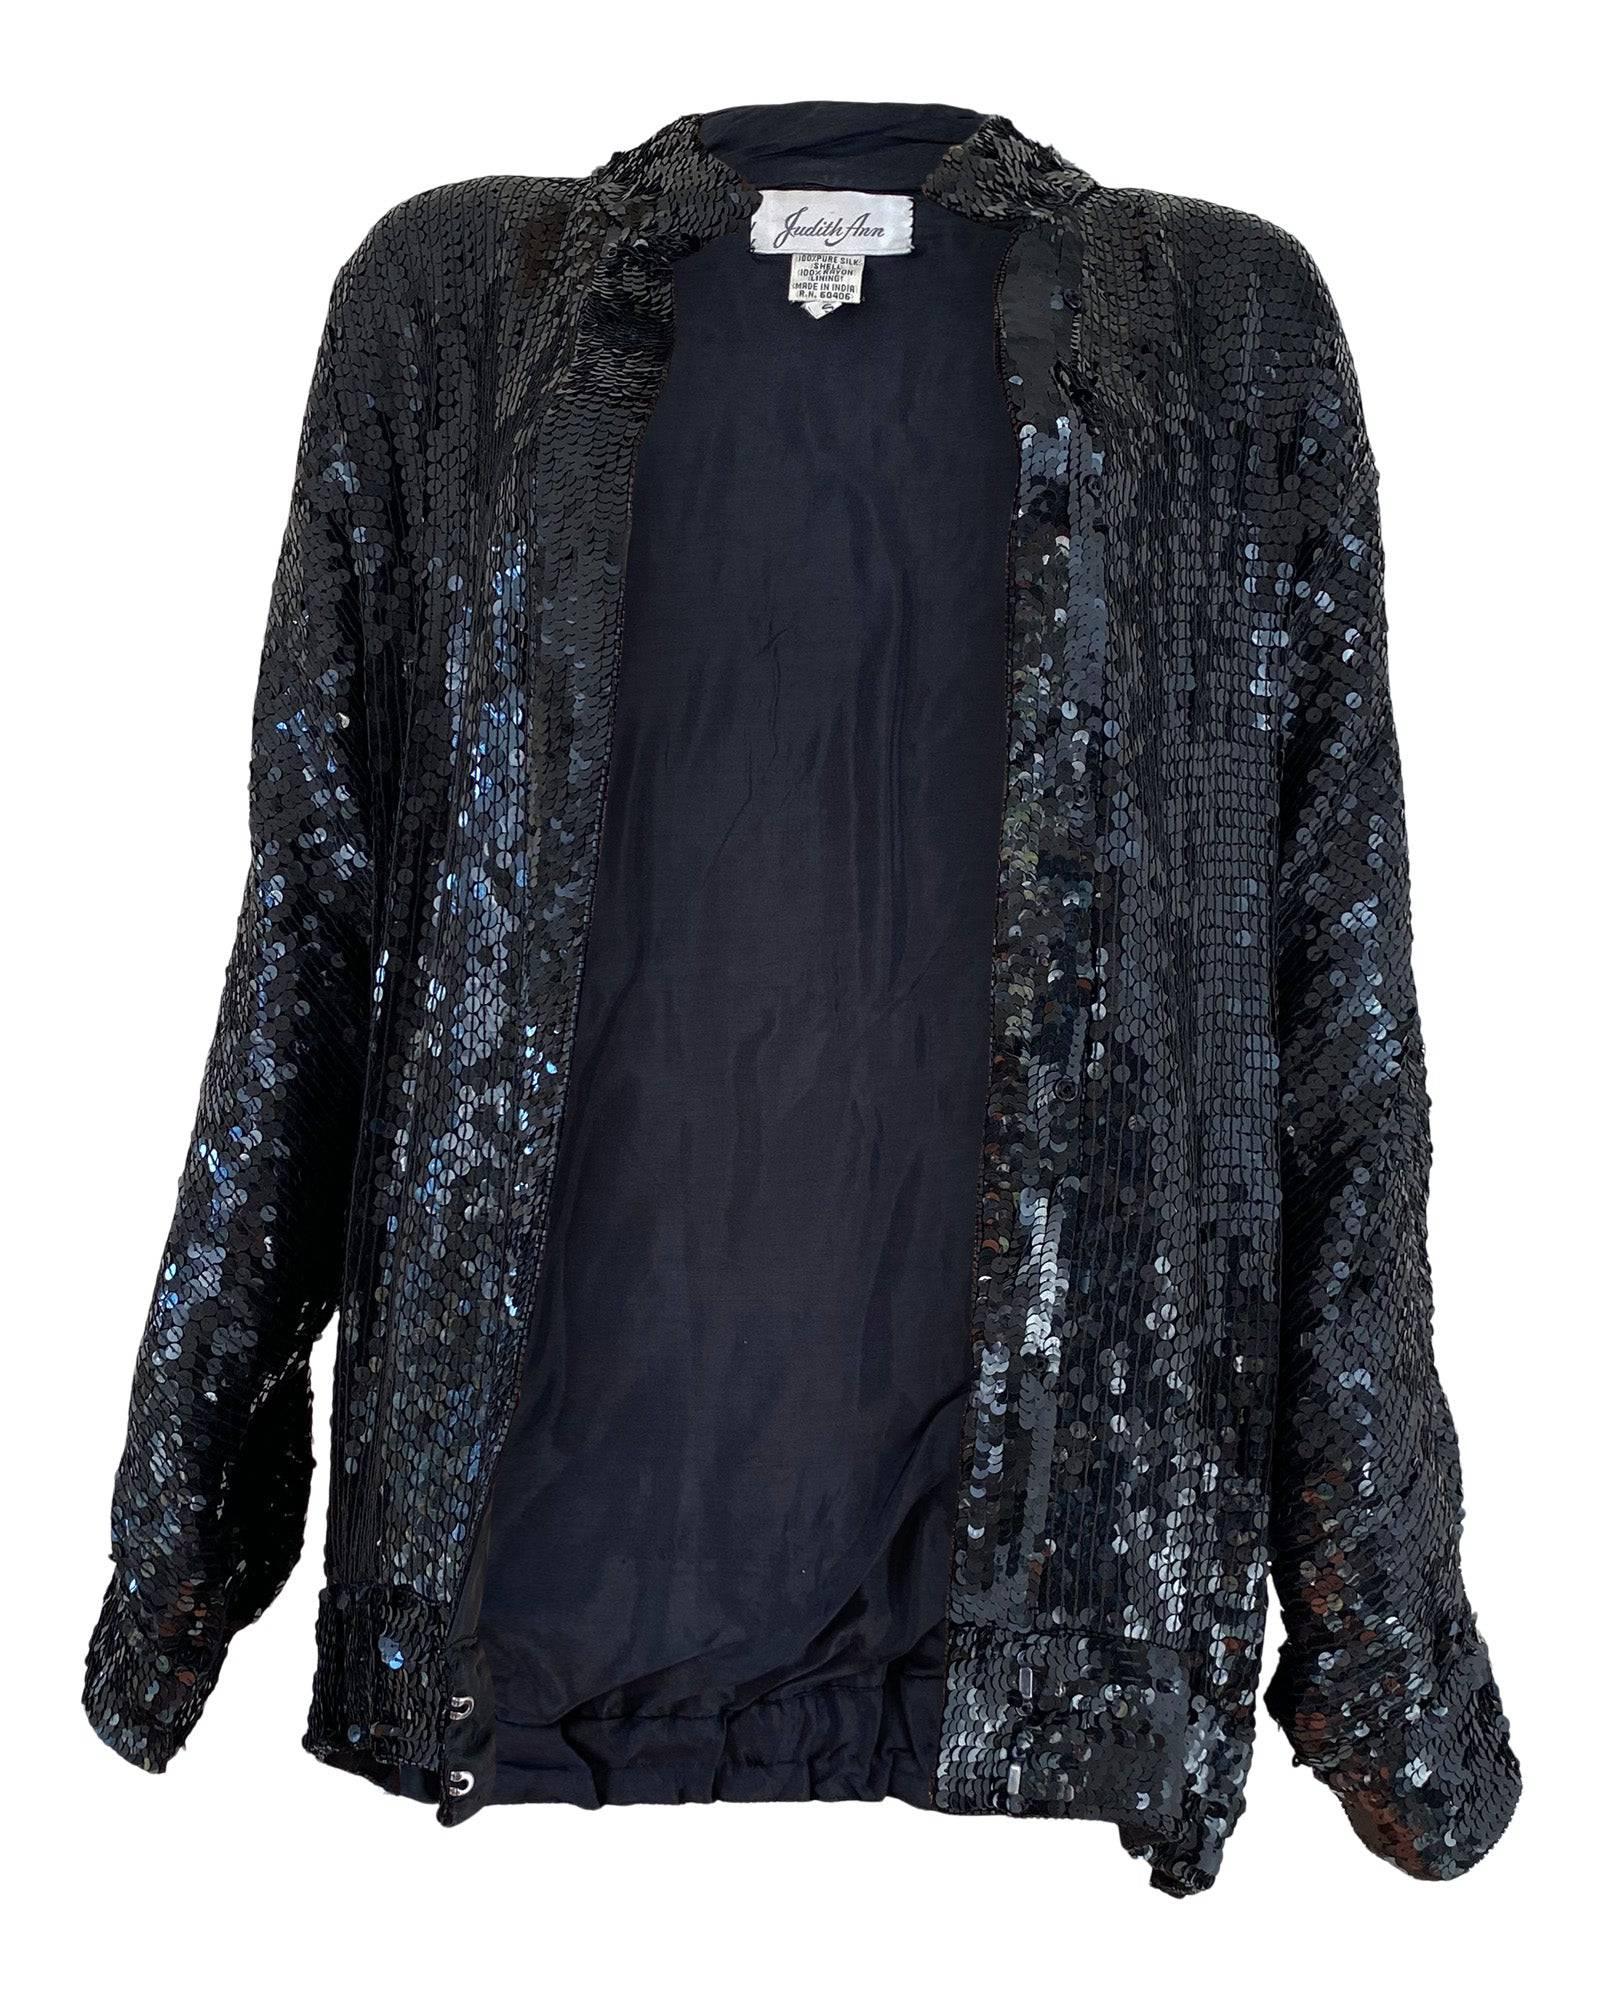 What a fun piece! You'll adore the multiple styling options of this festive 1980s silk sequined jacket - wear it alone as a shirt, open as a cardigan, or fully closed to show off the banded collar and dolman sleeves. The perfect piece for the